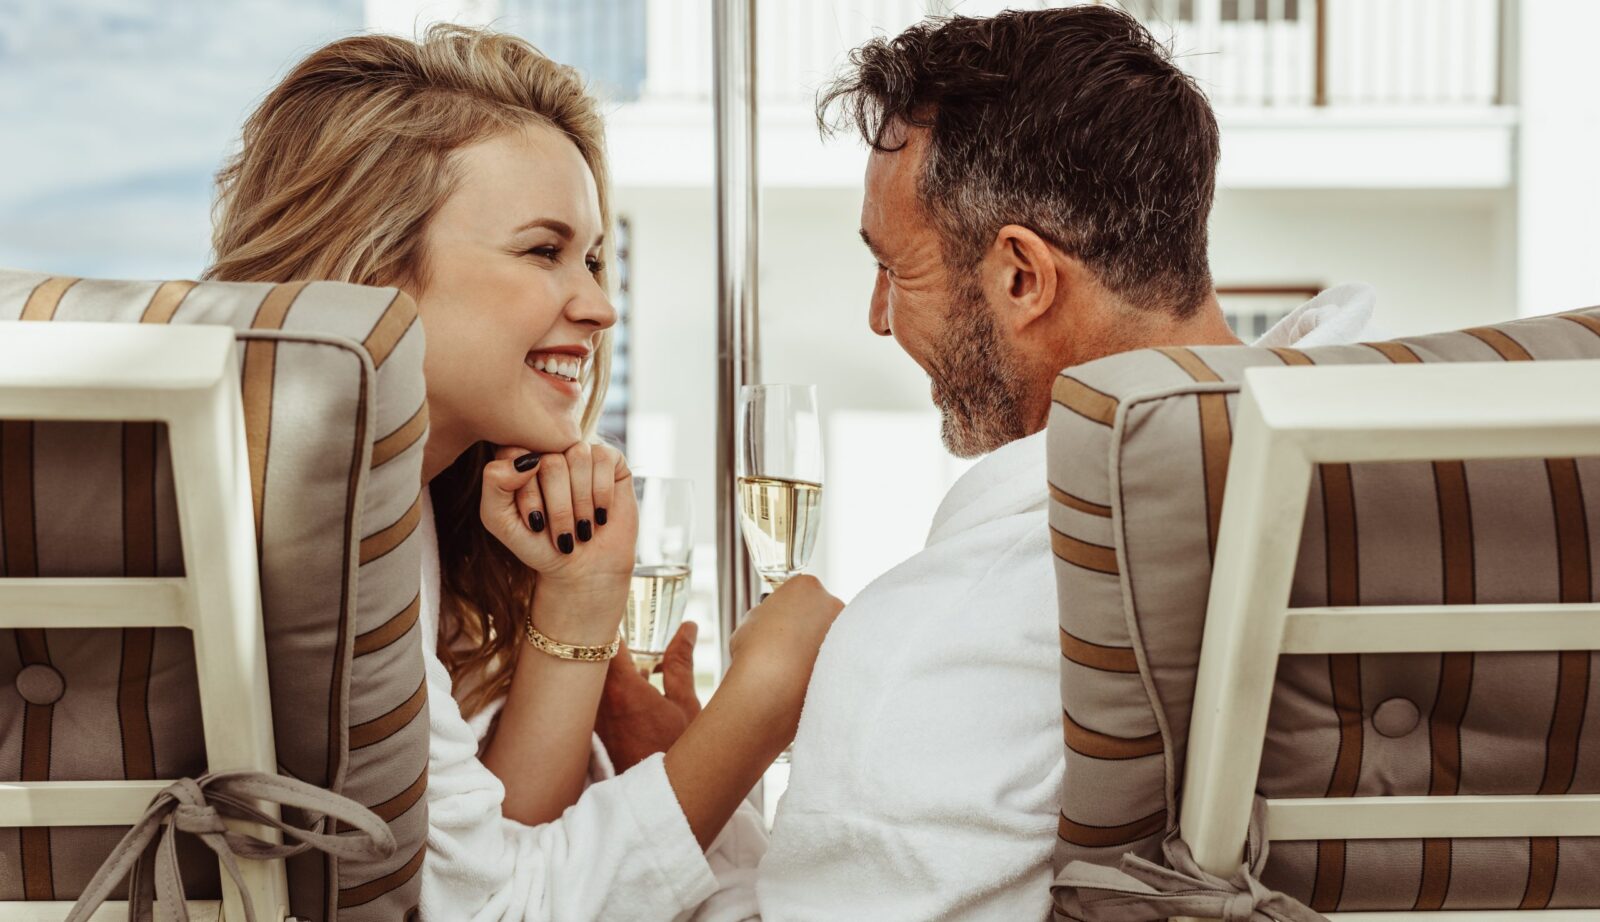 Curious to know about matchmaker in Orange County? Exquisiteintroductions.com is a superb platform that provides you service of finding the perfect match for you. Come to our site for more details.